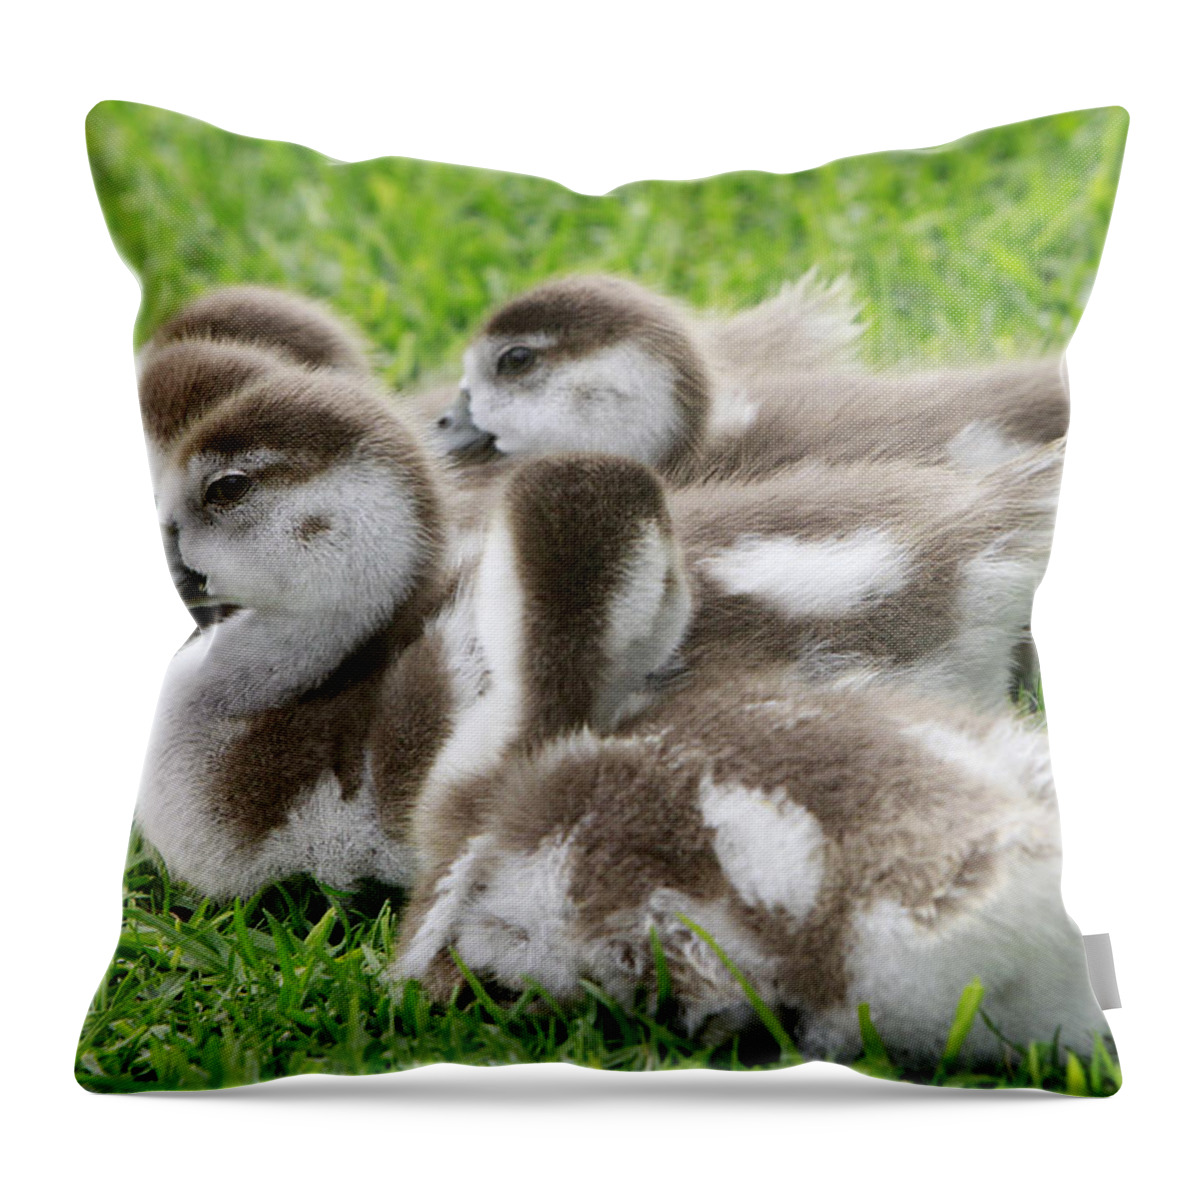 Egyptian Geese Throw Pillow featuring the photograph Huddle Up by Shoal Hollingsworth